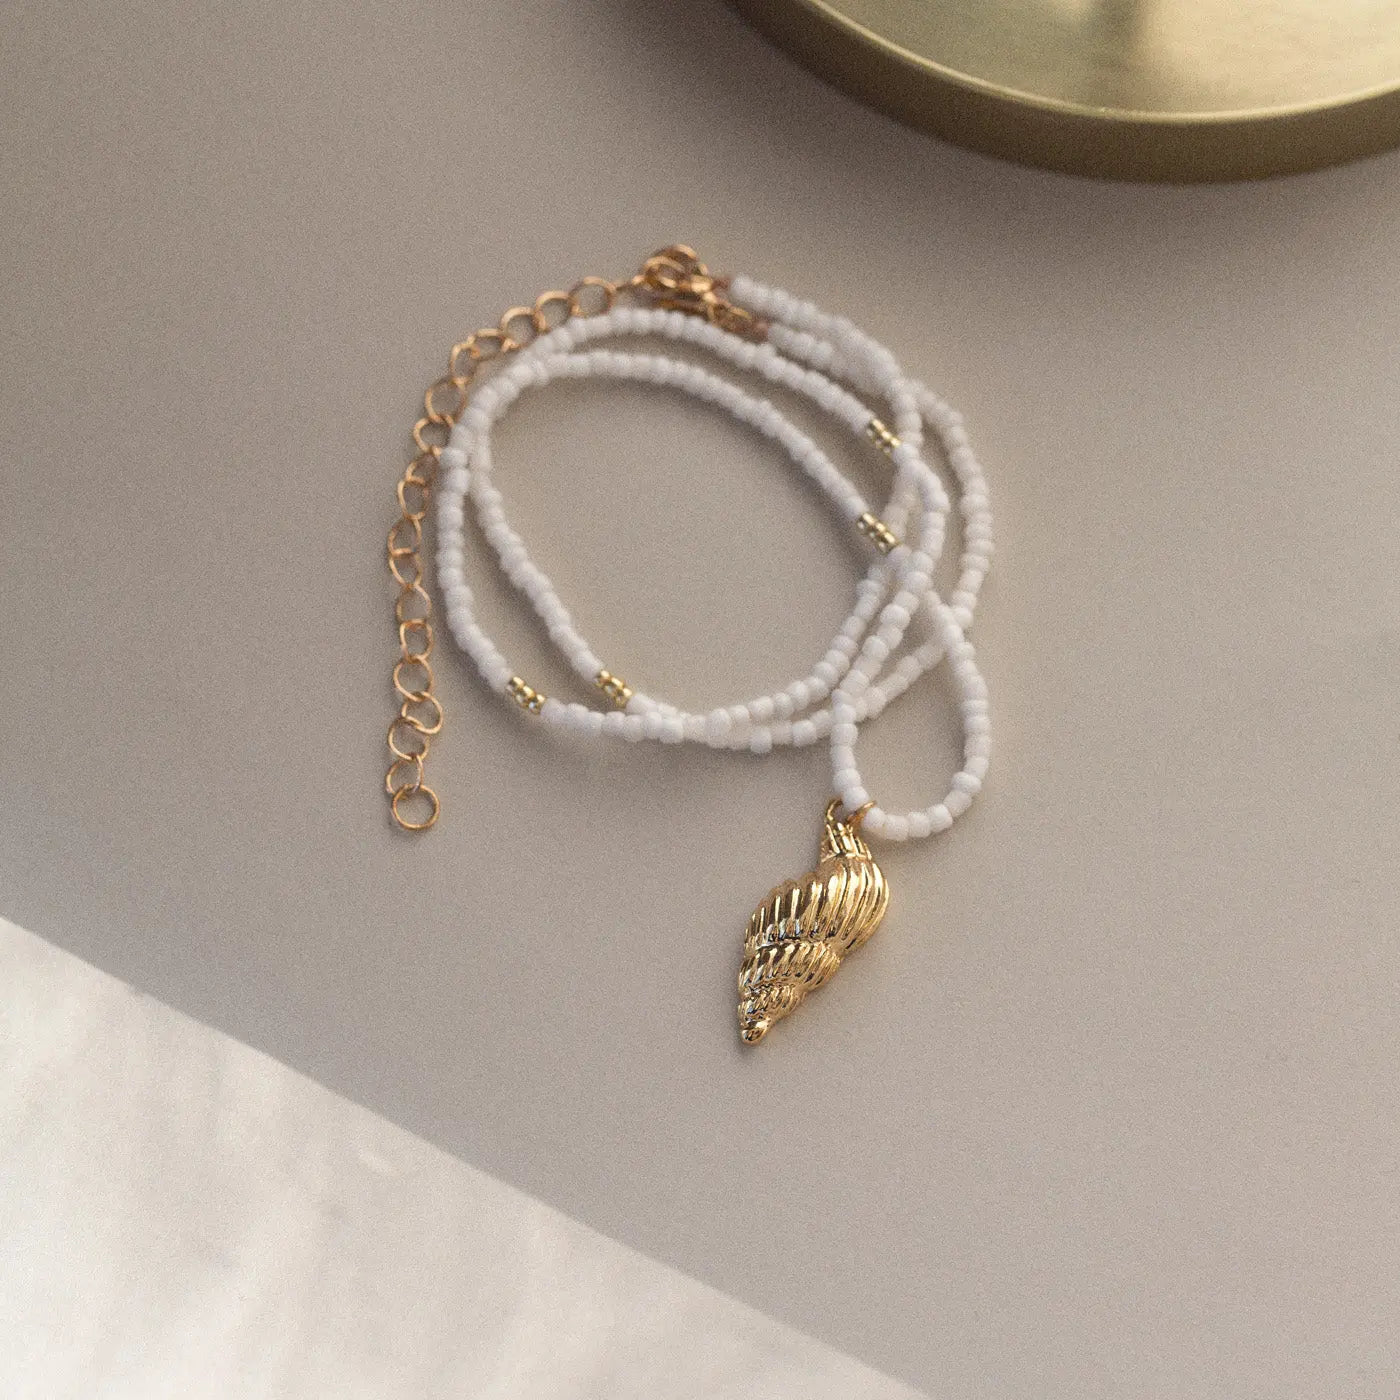 Ellie - Sea Shell White Beads Necklace